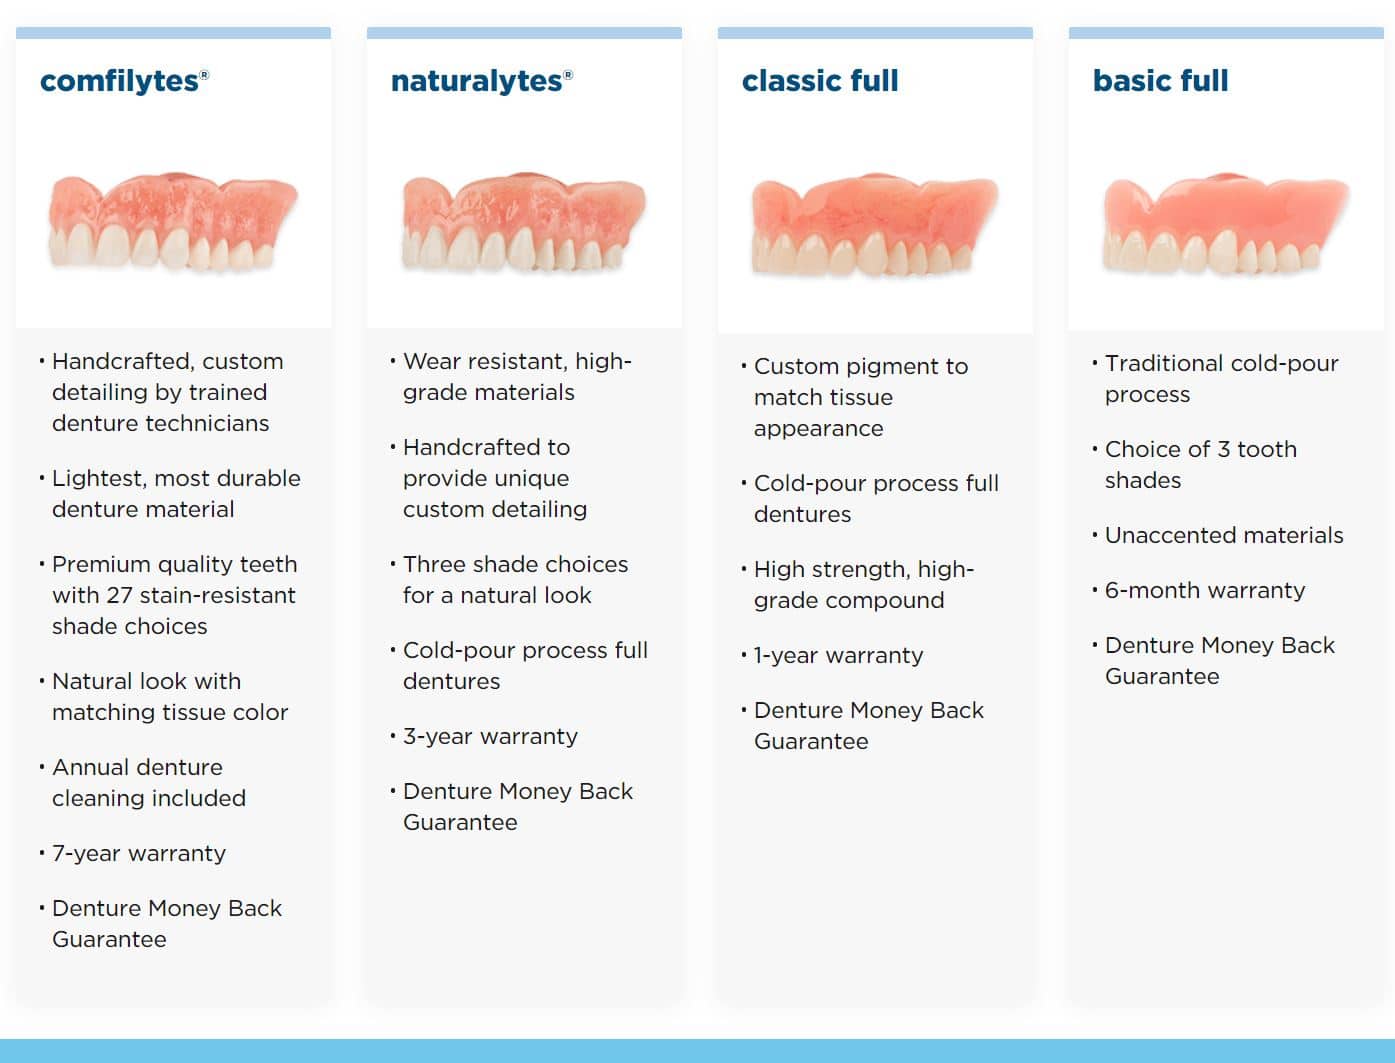 Affordable Dentures or Aspen Dental? What is the Best Brand for